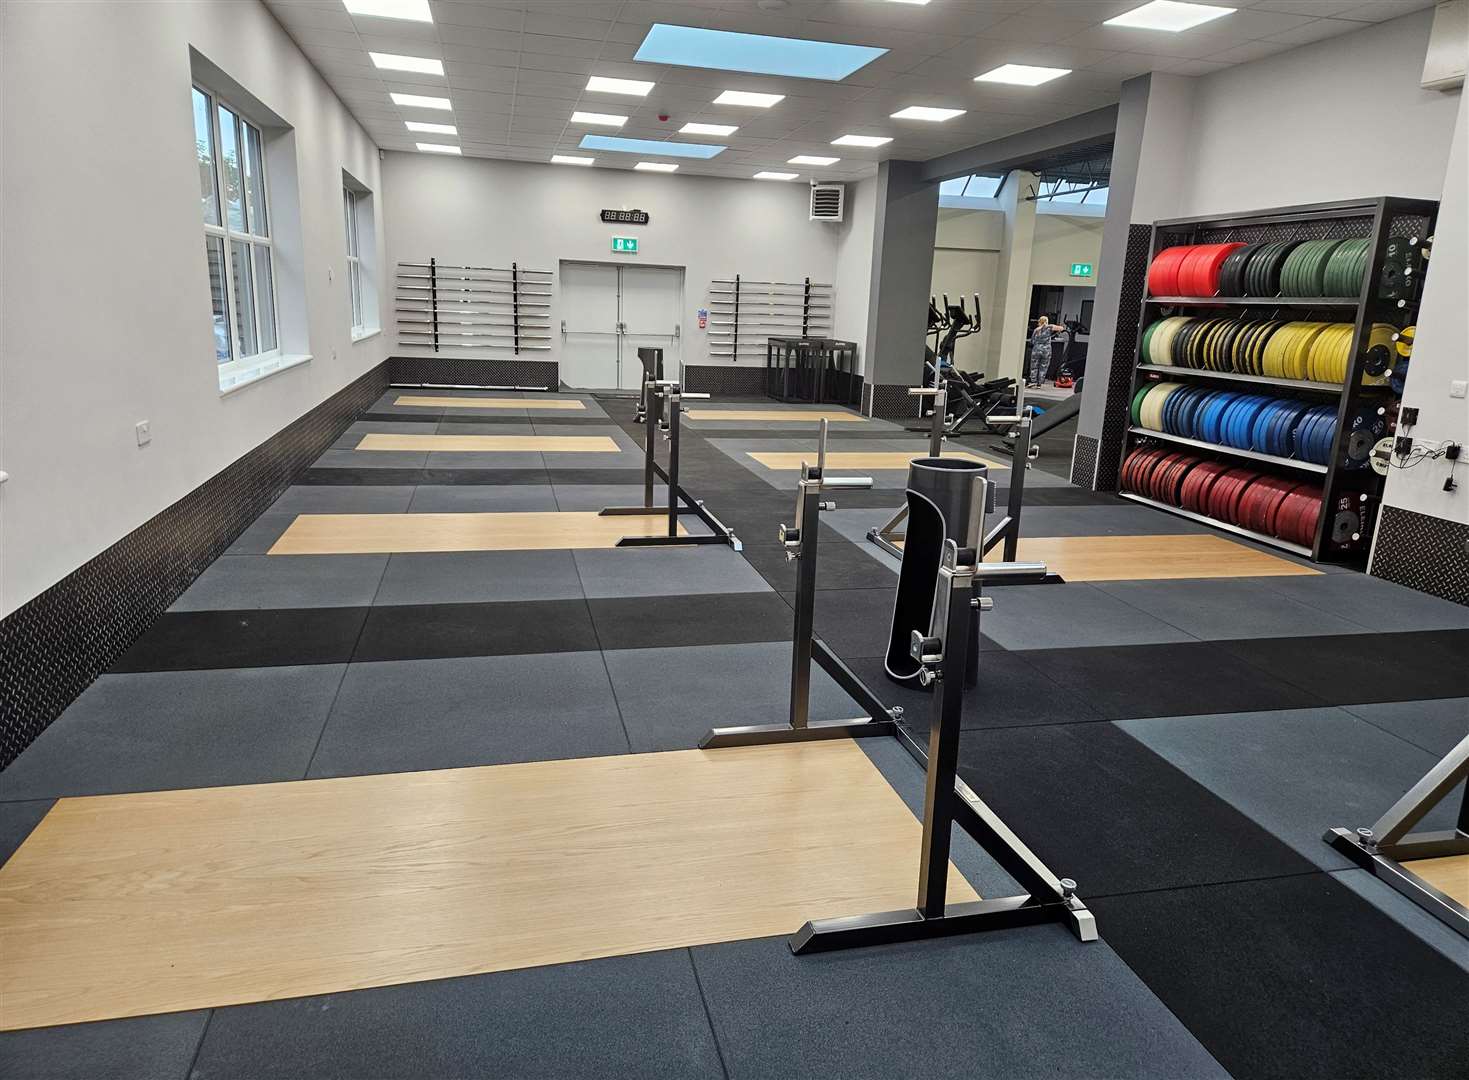 Weightlifting Room at the newly refurbished Europa Weightlifting Gym in Temple Hill, Dartford. Photo credit: Andrew Callard